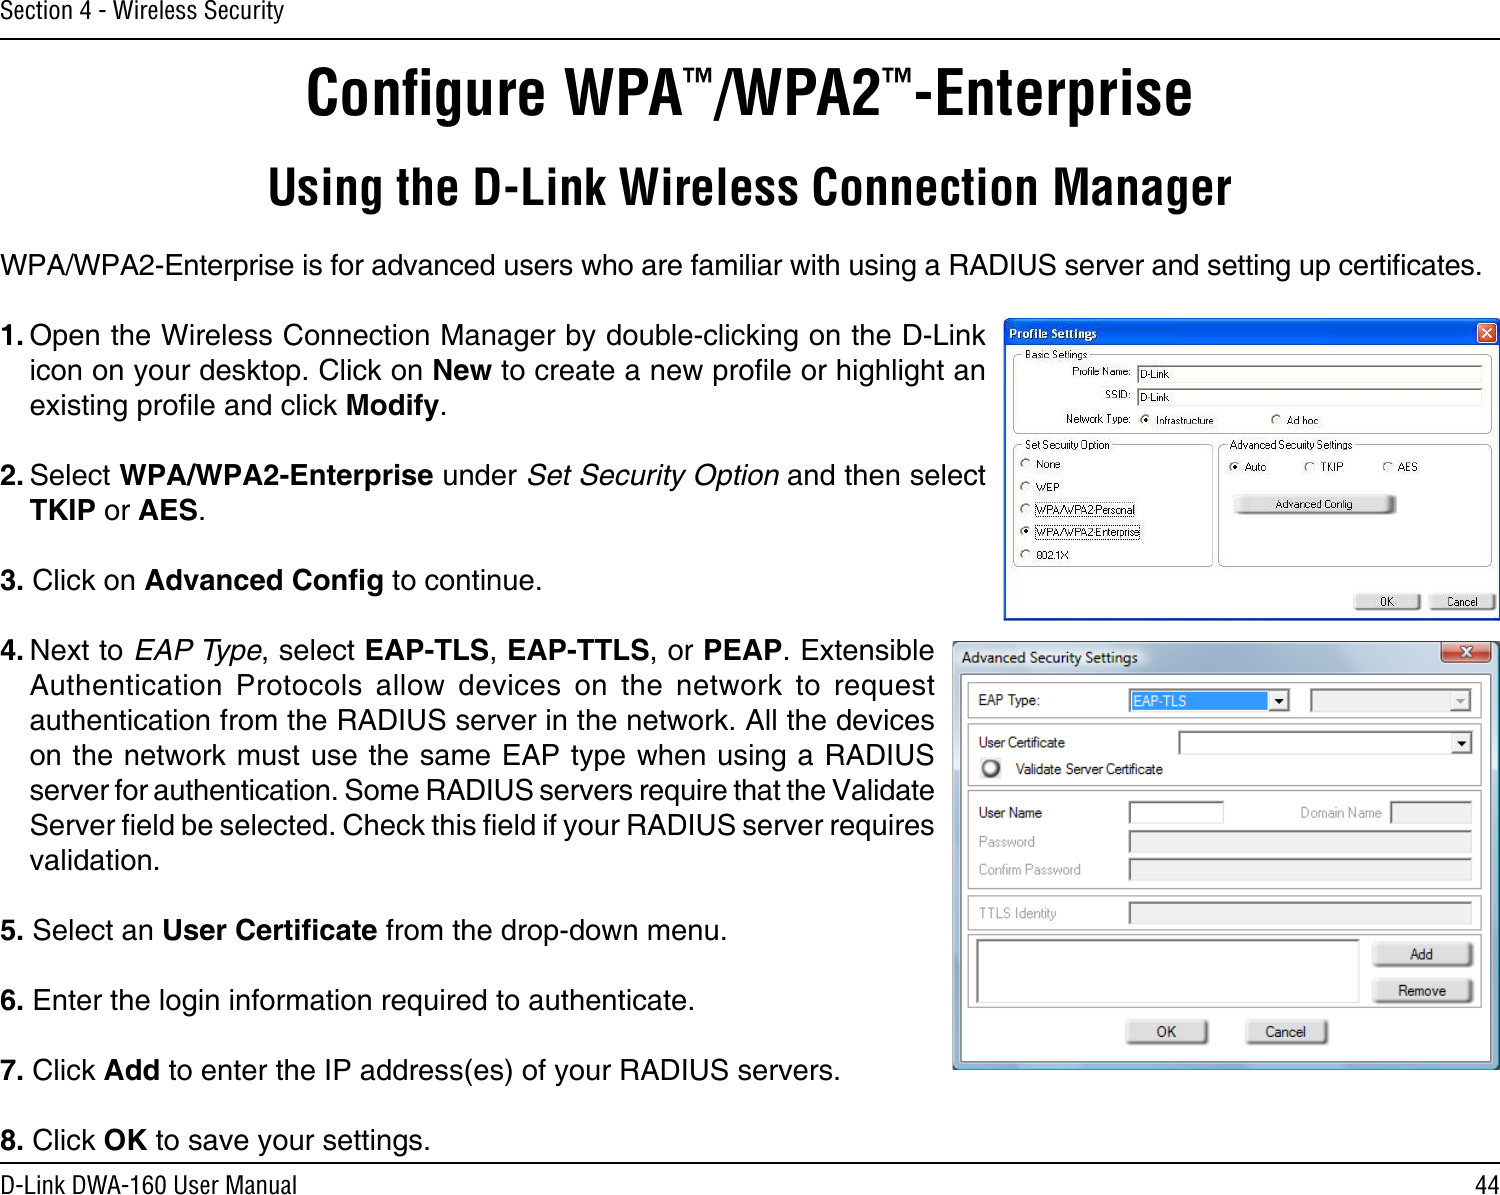 44D-Link DWA-160 User ManualSection 4 - Wireless SecurityConﬁgure WPA™/WPA2™-EnterpriseUsing the D-Link Wireless Connection ManagerWPA/WPA2-Enterprise is for advanced users who are familiar with using a RADIUS server and setting up certicates.1. Open the Wireless Connection Manager by double-clicking on the D-Link icon on your desktop. Click on New to create a new prole or highlight an existing prole and click Modify. 2. Select WPA/WPA2-Enterprise under Set Security Option and then select TKIP or AES.3. Click on Advanced Cong to continue.4. Next to EAP Type, select EAP-TLS, EAP-TTLS, or PEAP. Extensible Authentication  Protocols  allow  devices  on  the  network  to  request authentication from the RADIUS server in the network. All the devices on the network must use the same EAP type when using a RADIUS server for authentication. Some RADIUS servers require that the Validate Server eld be selected. Check this eld if your RADIUS server requires validation.5. Select an User Certicate from the drop-down menu.6. Enter the login information required to authenticate.7. Click Add to enter the IP address(es) of your RADIUS servers.8. Click OK to save your settings.